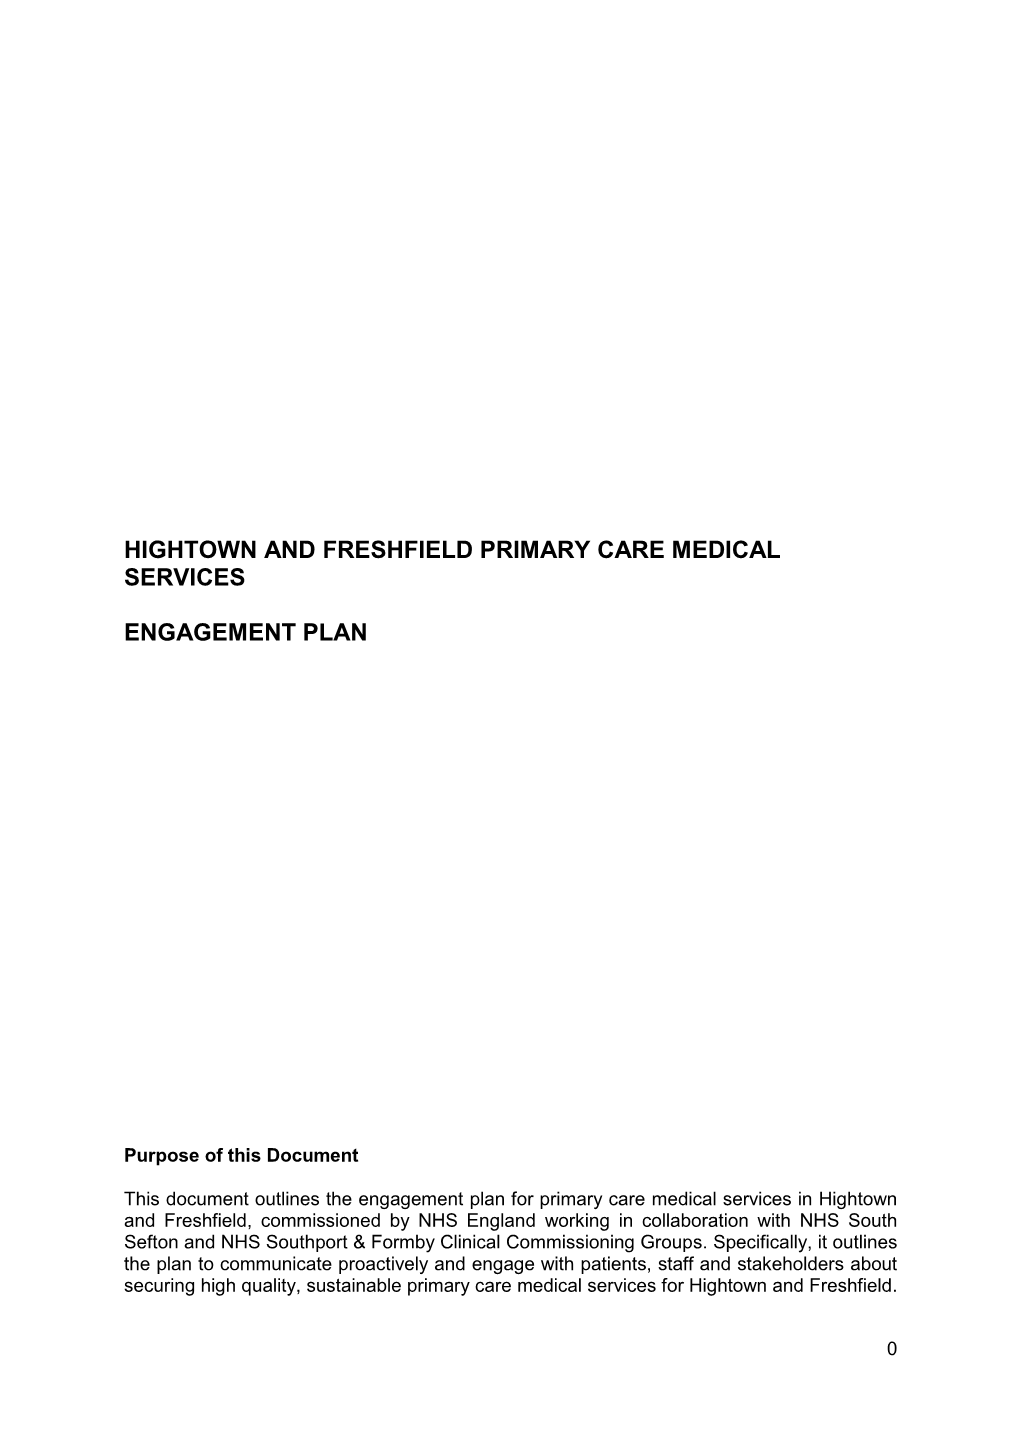 Hightown and Freshfield Primary Care Medical Services Engagement Plan